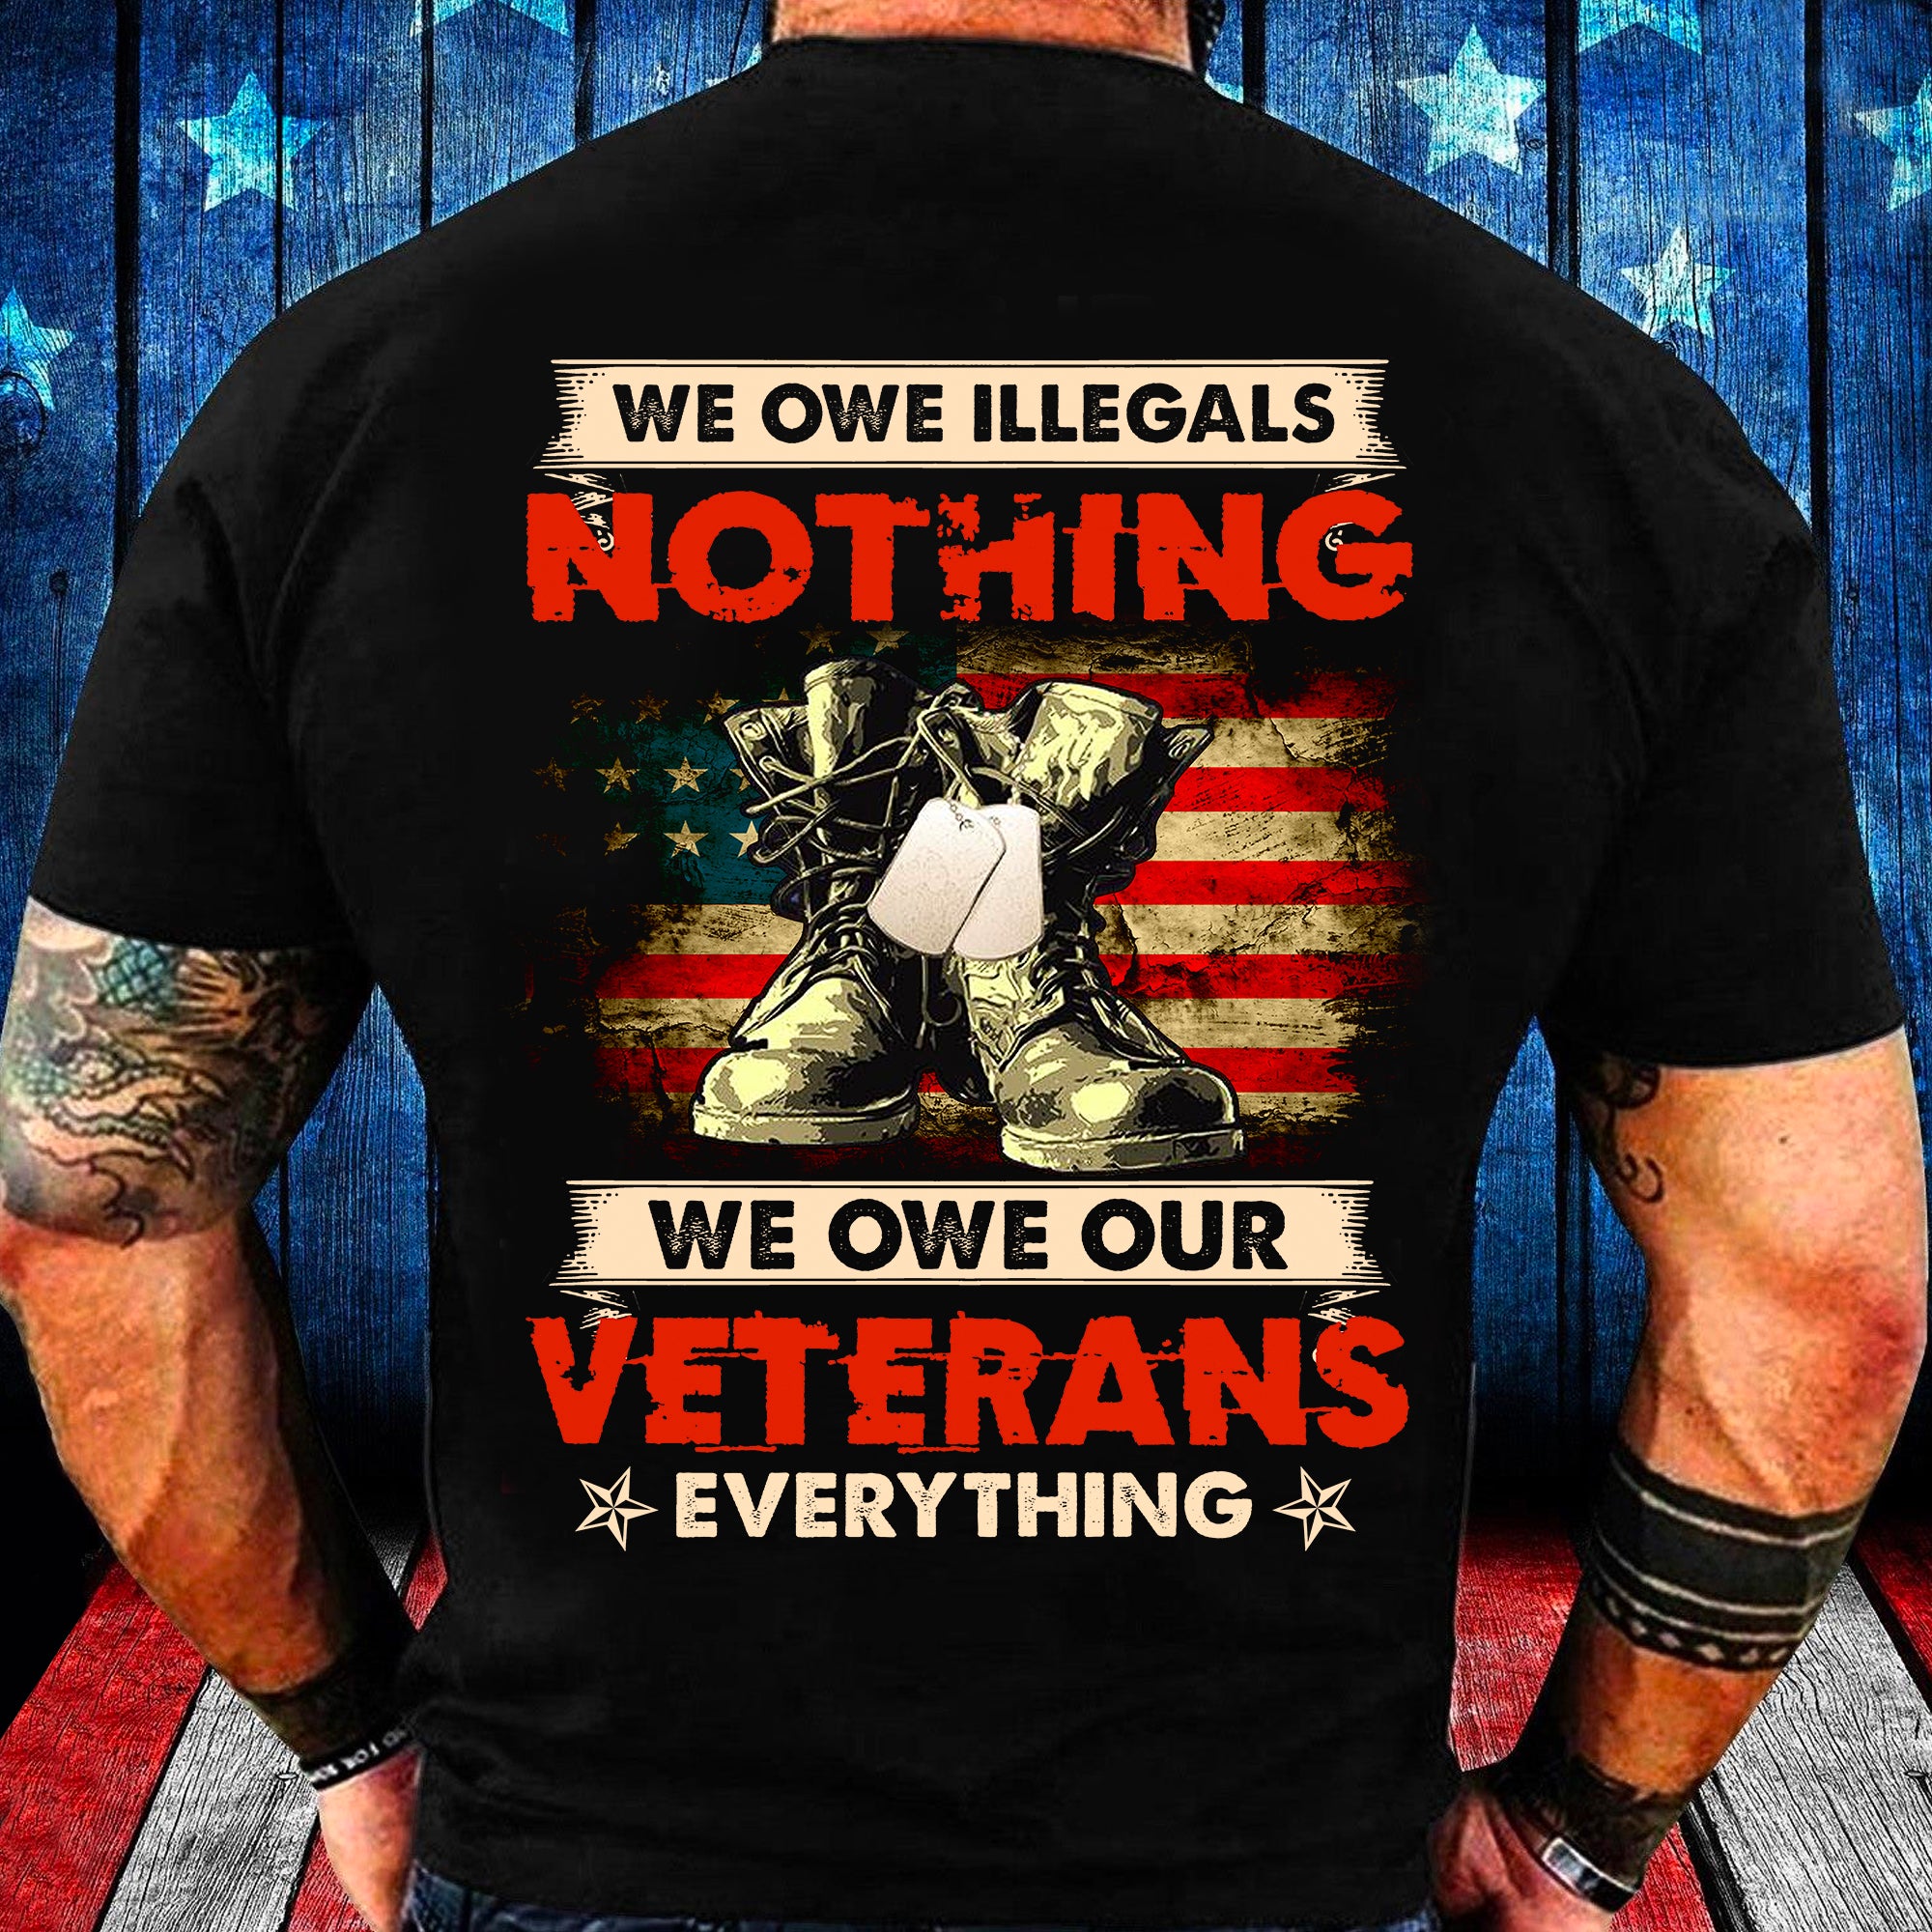 We Owe Illegals Nothing We Owe Our Veterans Everything T-shirt